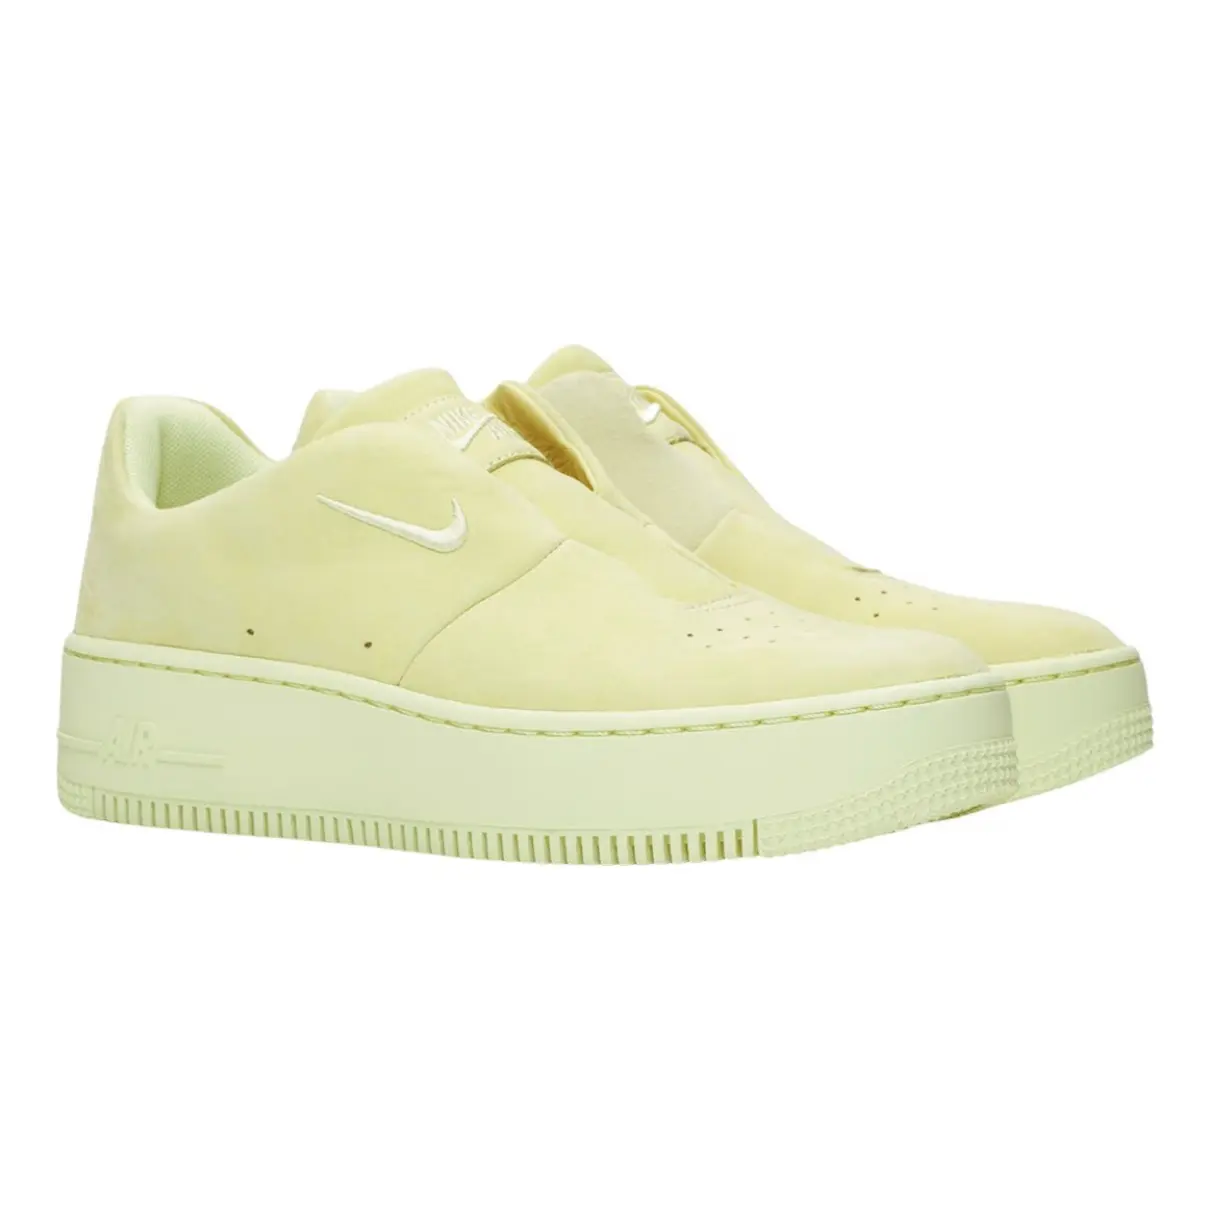 Buy Nike Air Force 1 trainers online